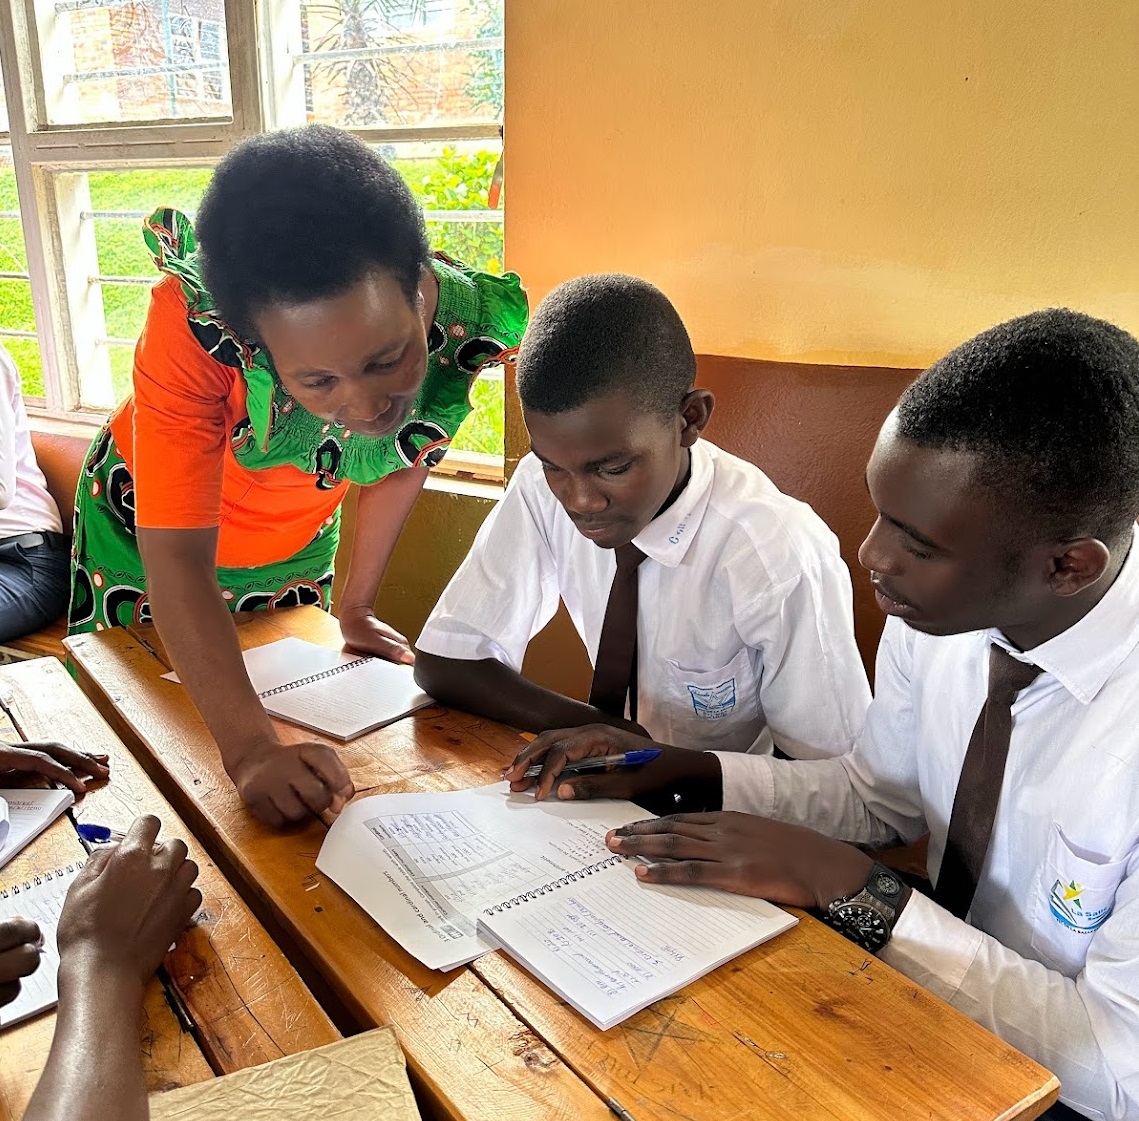 Ongoing: English Teacher Trainers trained by STELIR are guiding teachers in Rwanda through 30-60 hr residential courses. Afterwards, teachers continue honing their skills with self-study materials on 4G tablets. Know more about #STELIR tinyurl.com/s4h7x9ns #BCEngSSA #BCCESSA